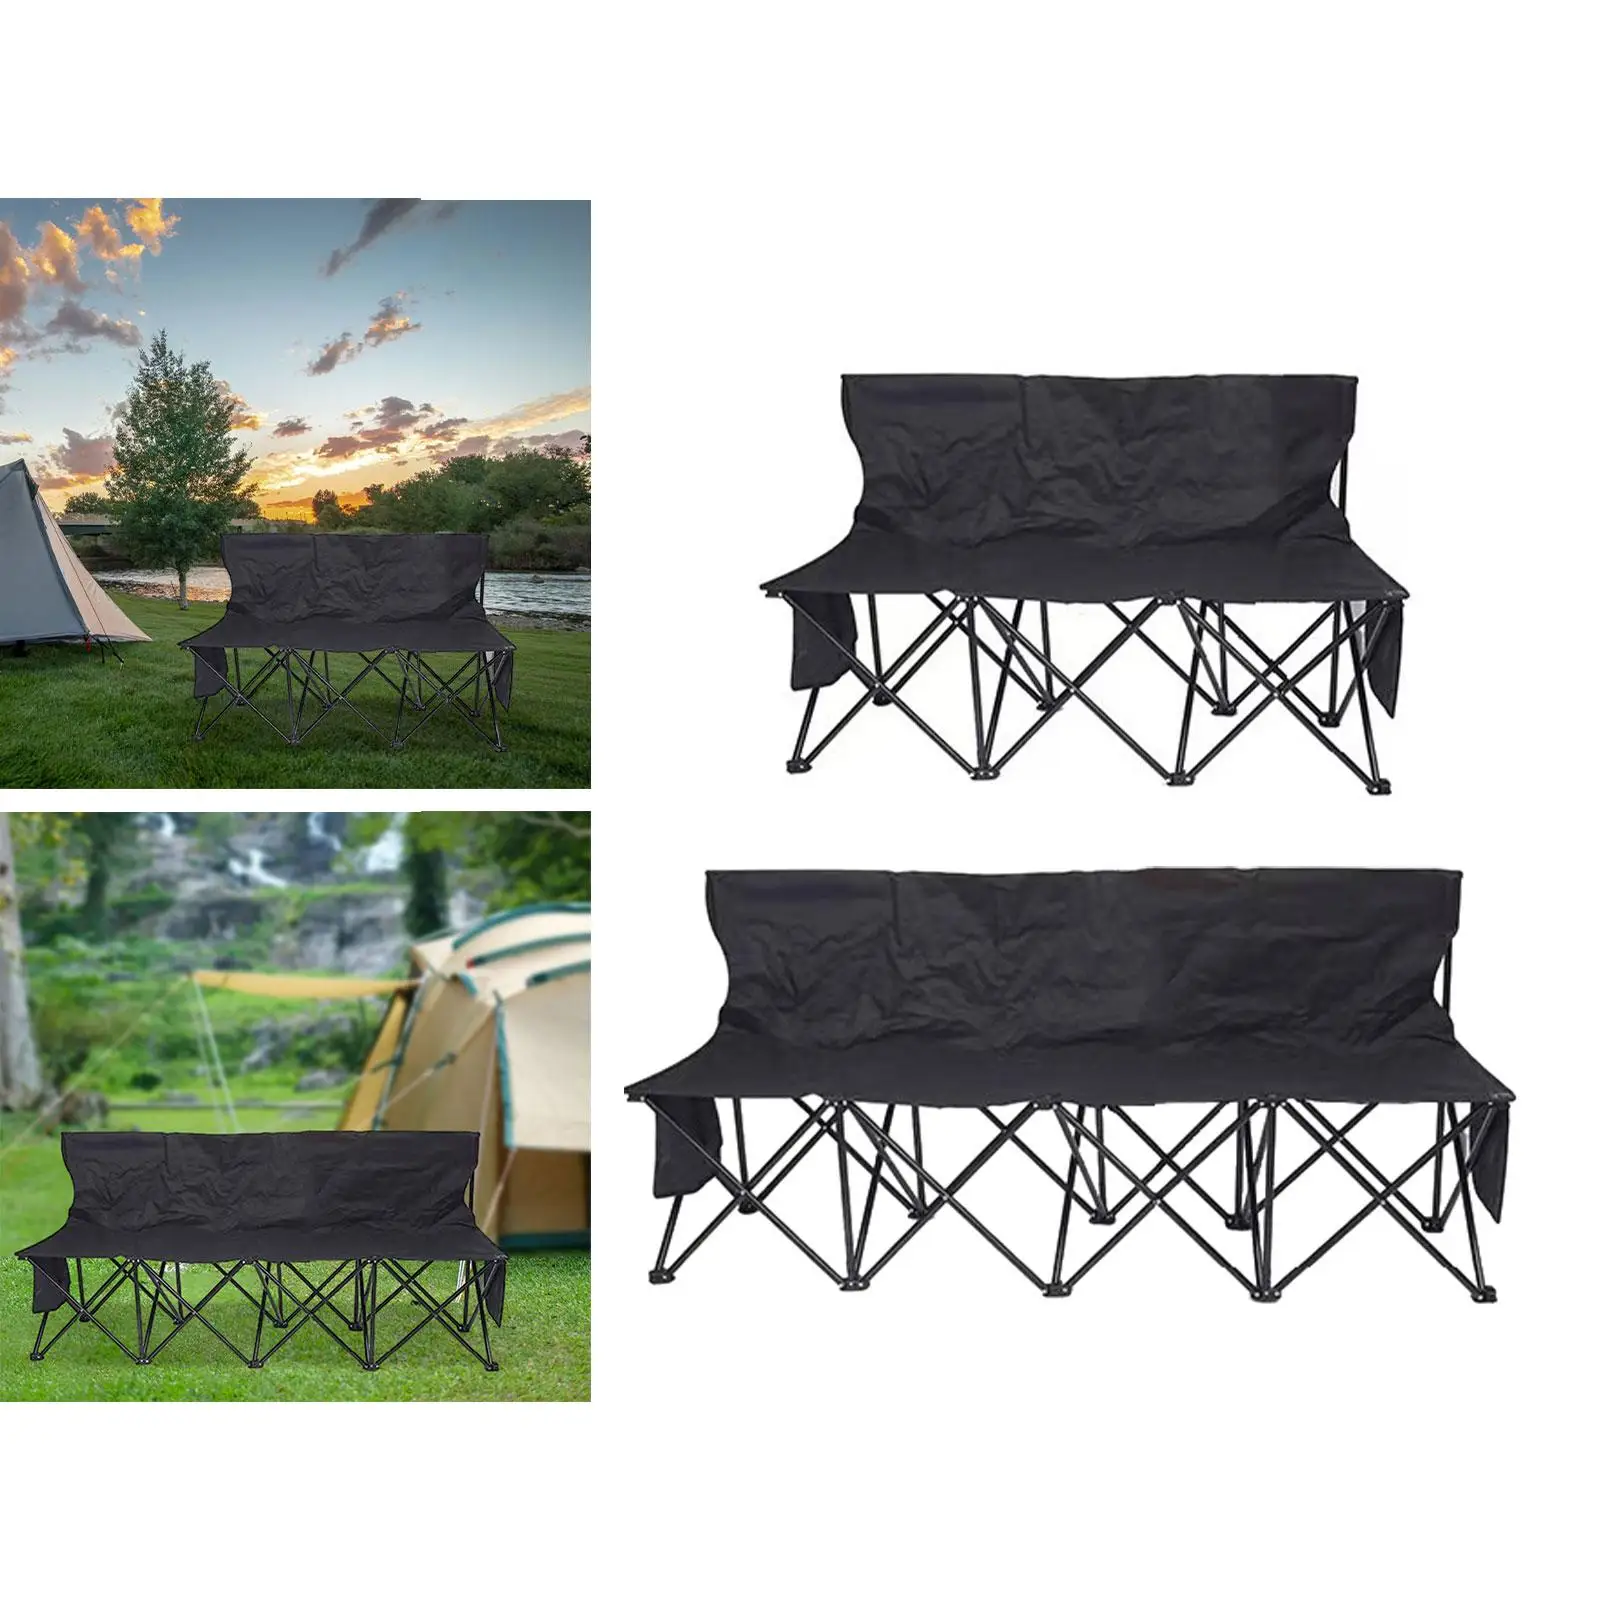 Folding Bench Seating Portable Sports Bench Lightweight with Backrest Portable Sideline Bench Foldable for Camping Sports